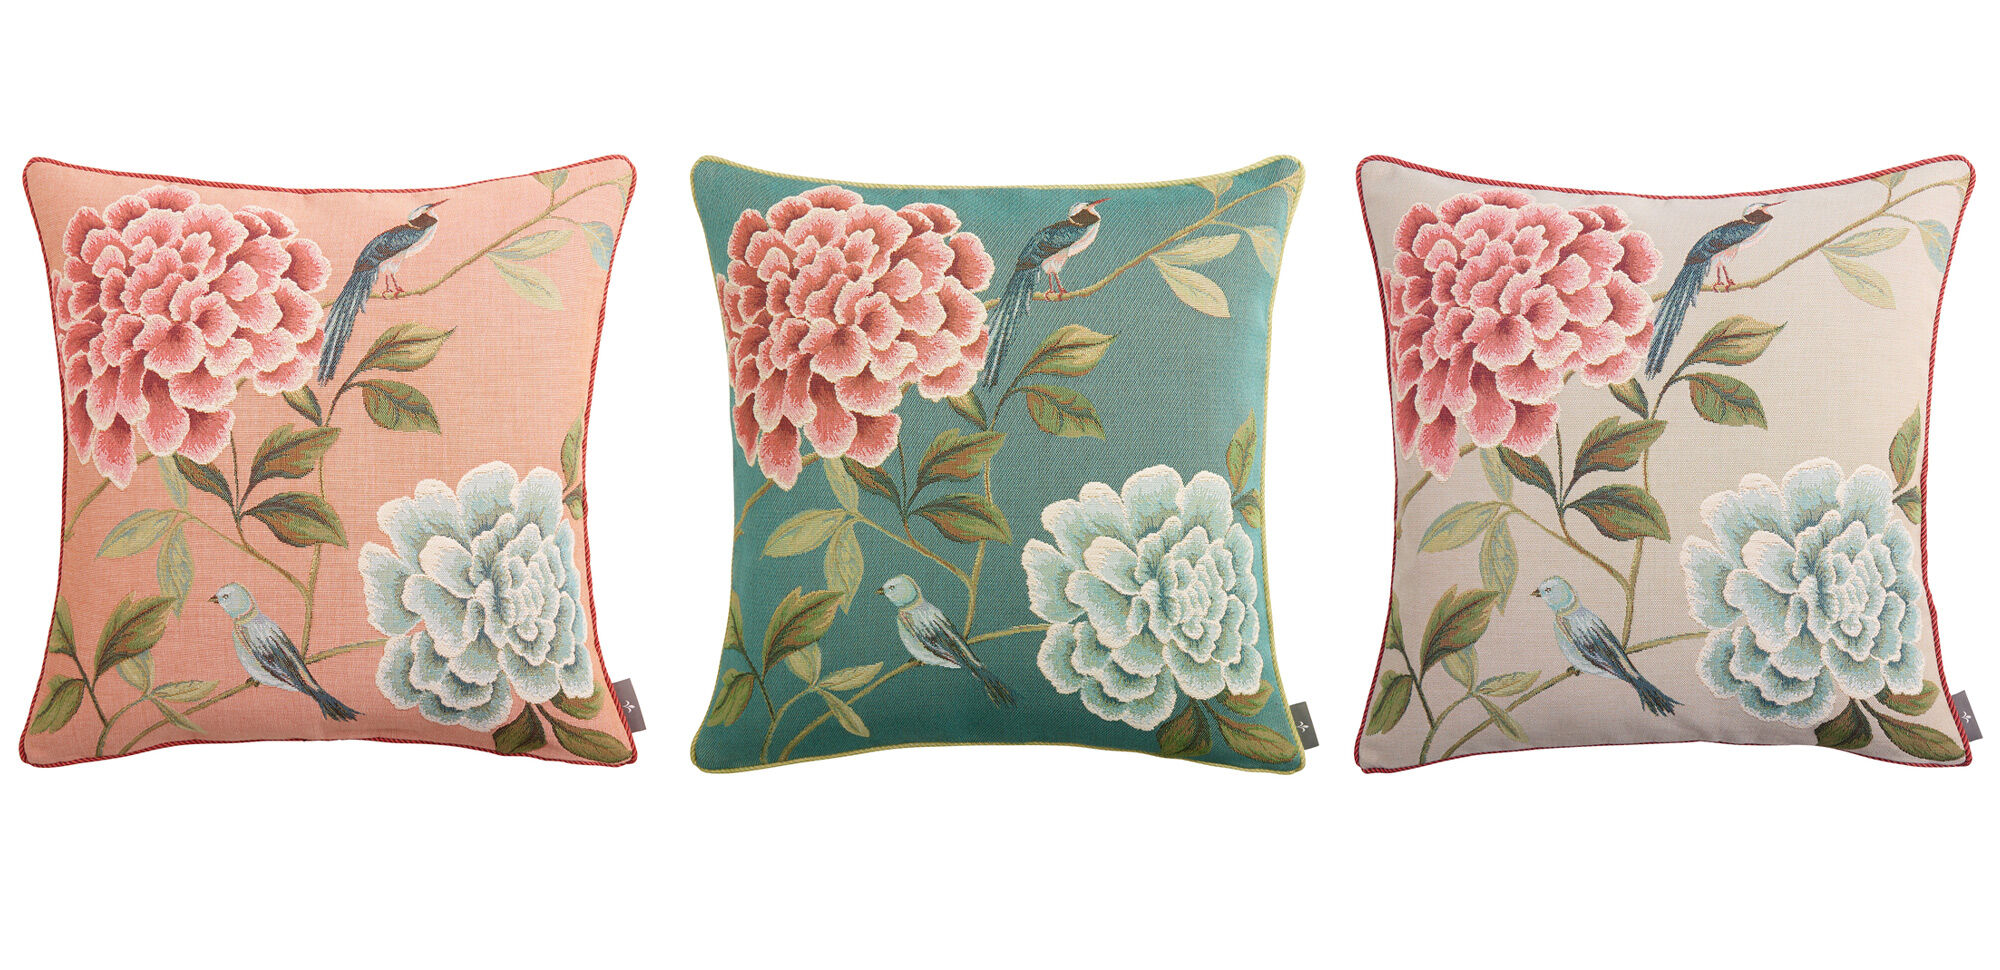 Set of 3 cushion covers "Floral Magic"